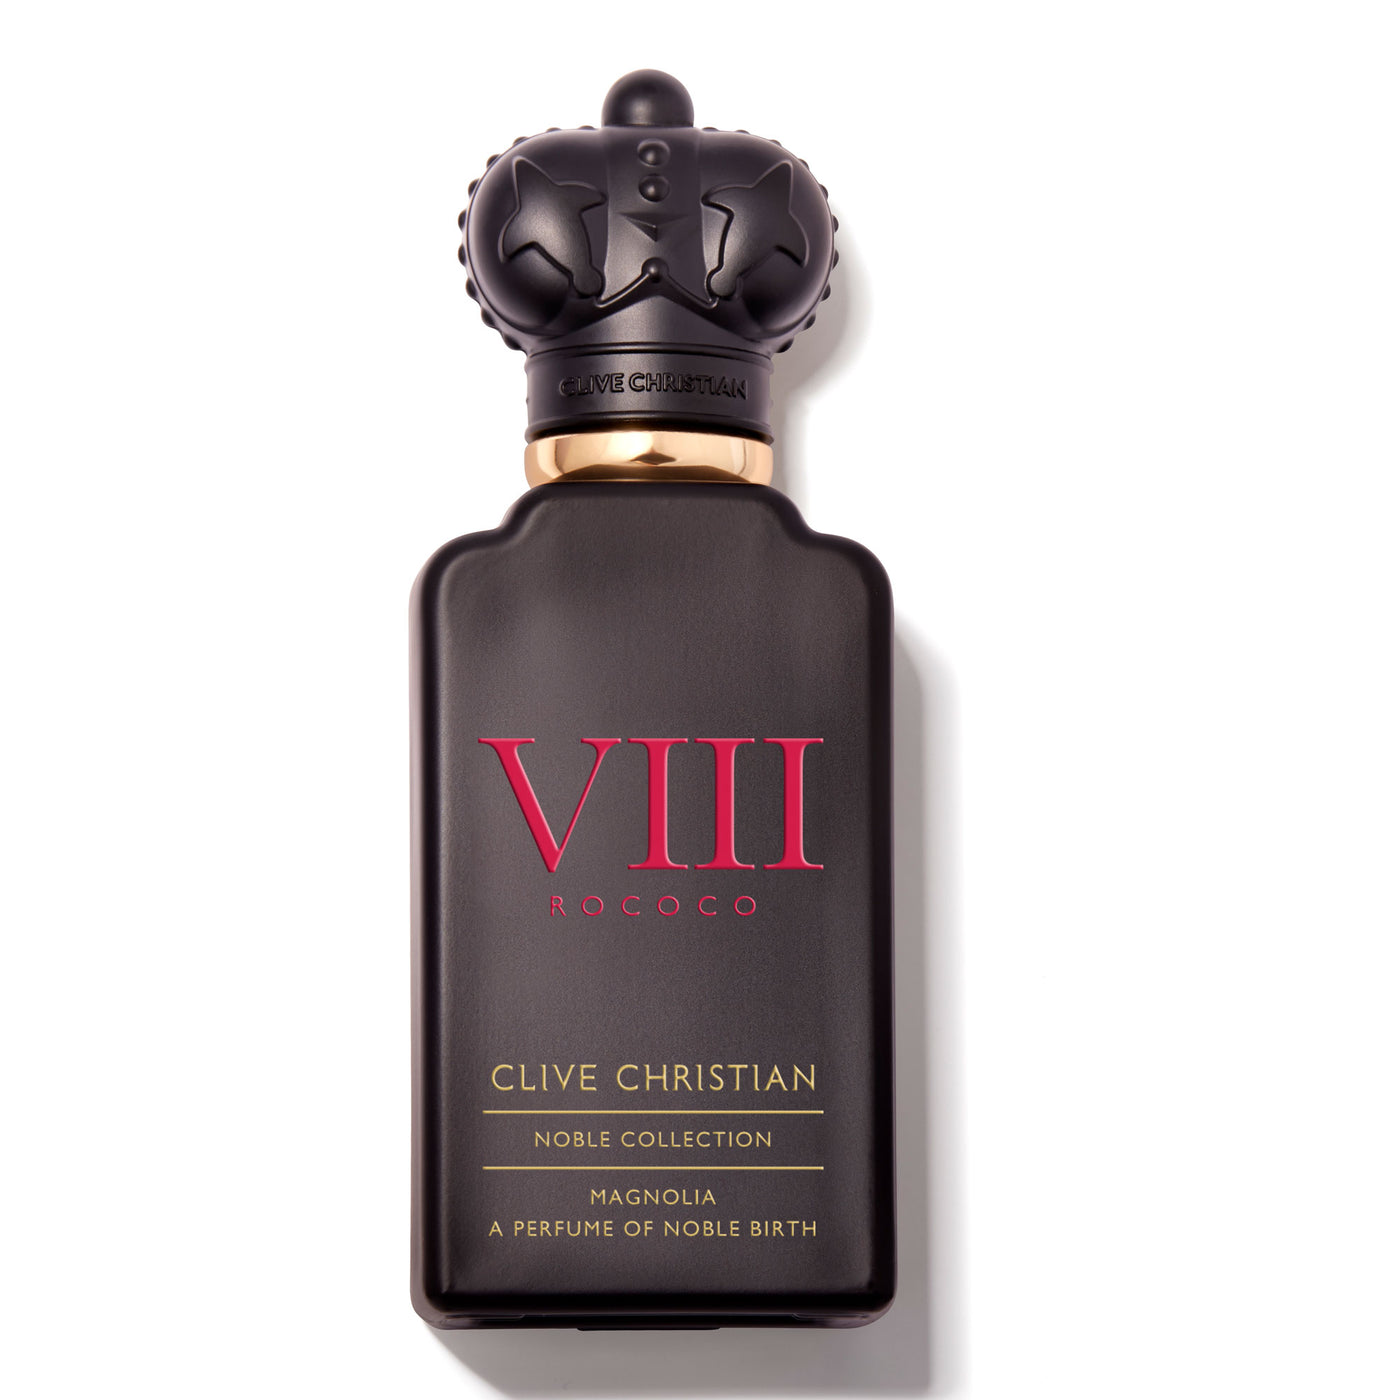 Clive Christian Rocco Magnolia - Noble Collection - 50ml - Gharyal by Collectibles 